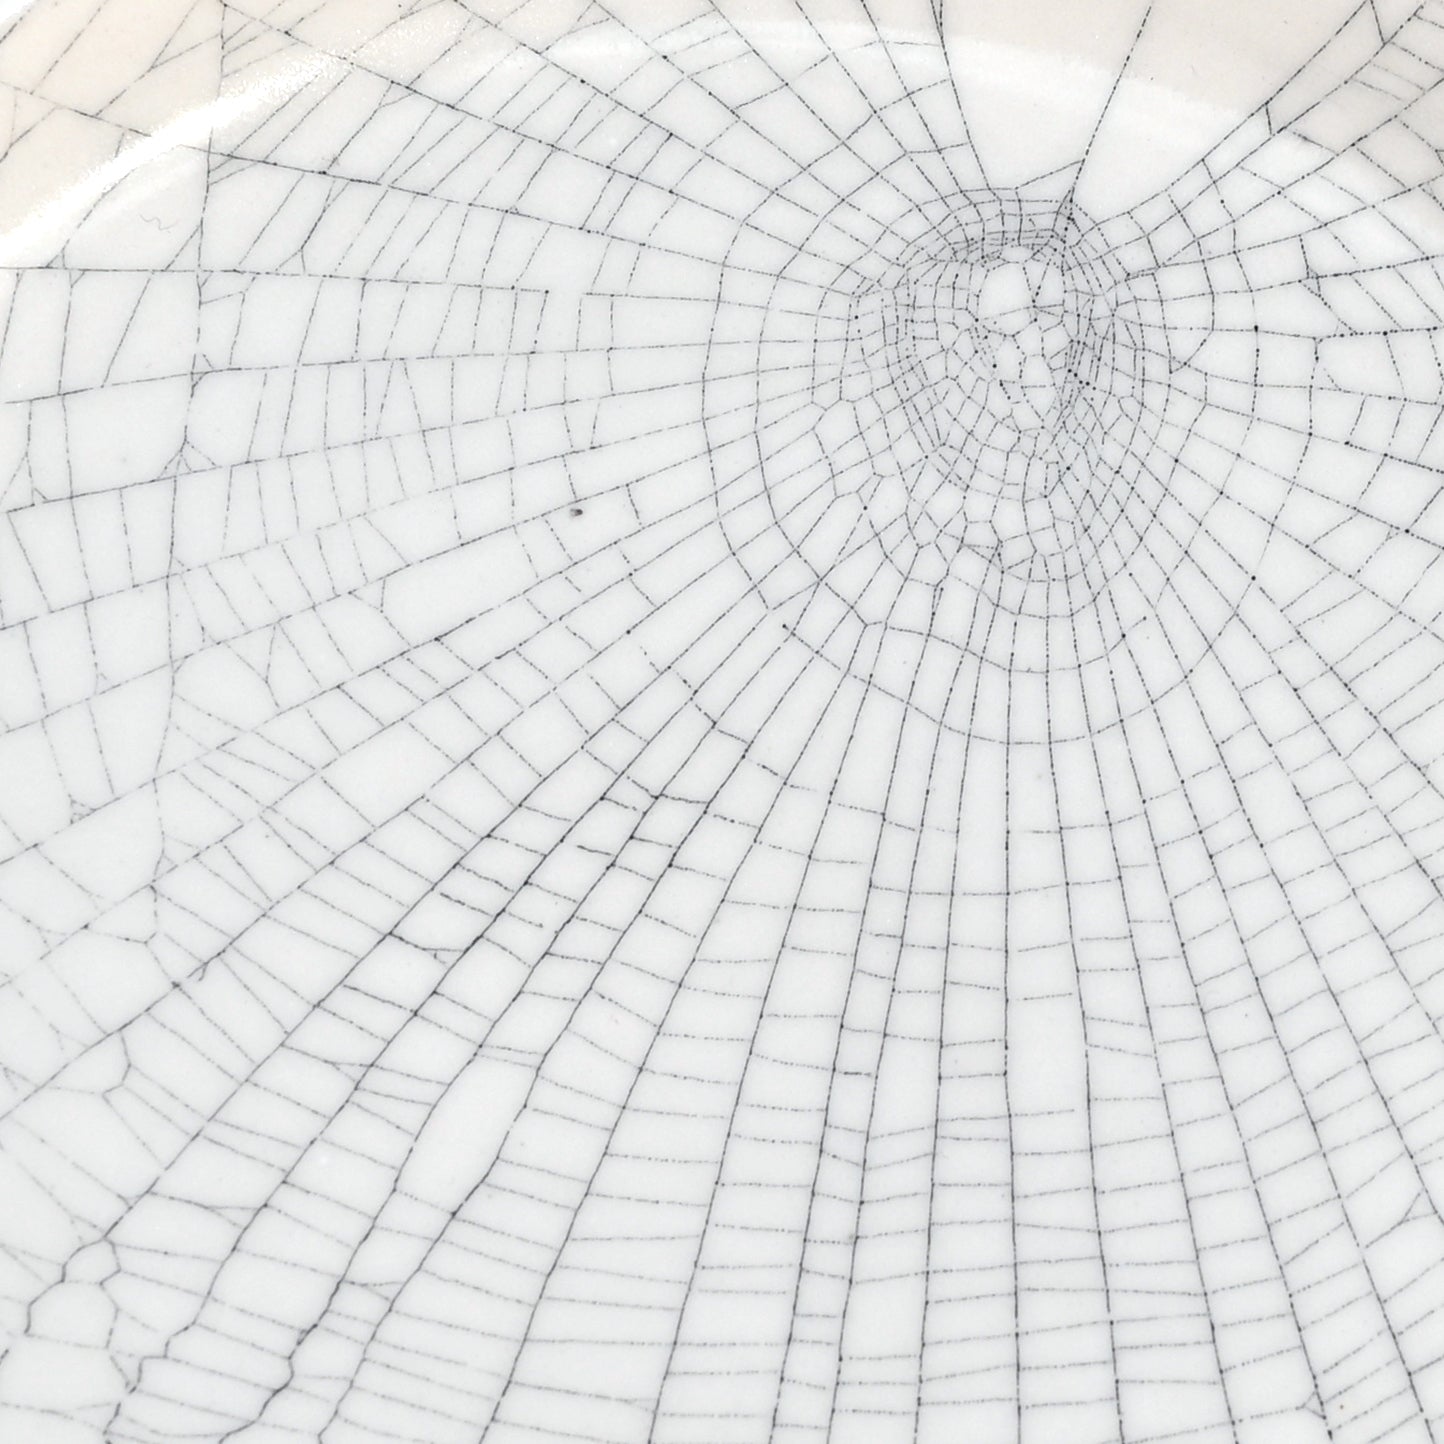 Web on Clay (232), Collected October 03, 2022